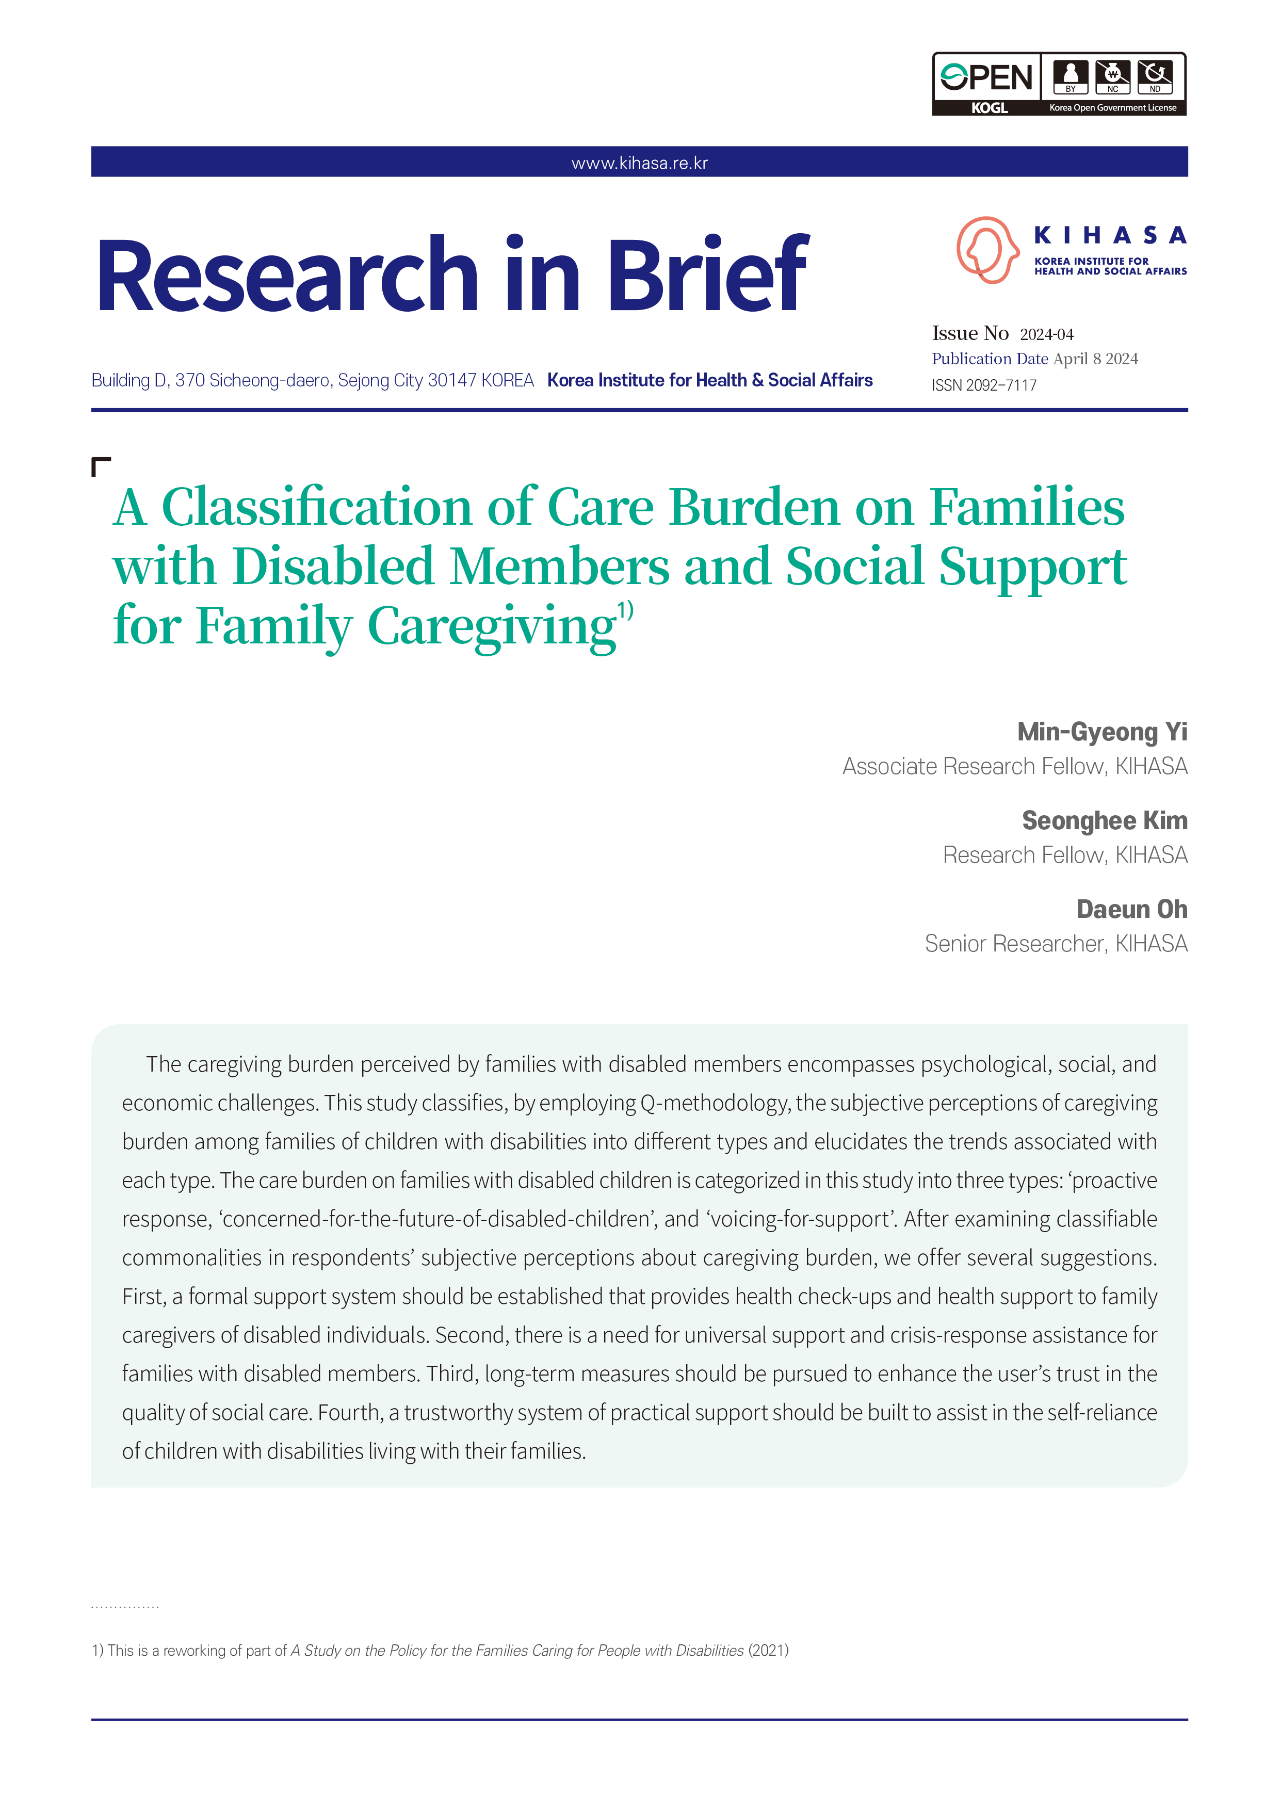 A Classification of Care Burden on Families with Disabled Members and Social Support for Family Caregiving